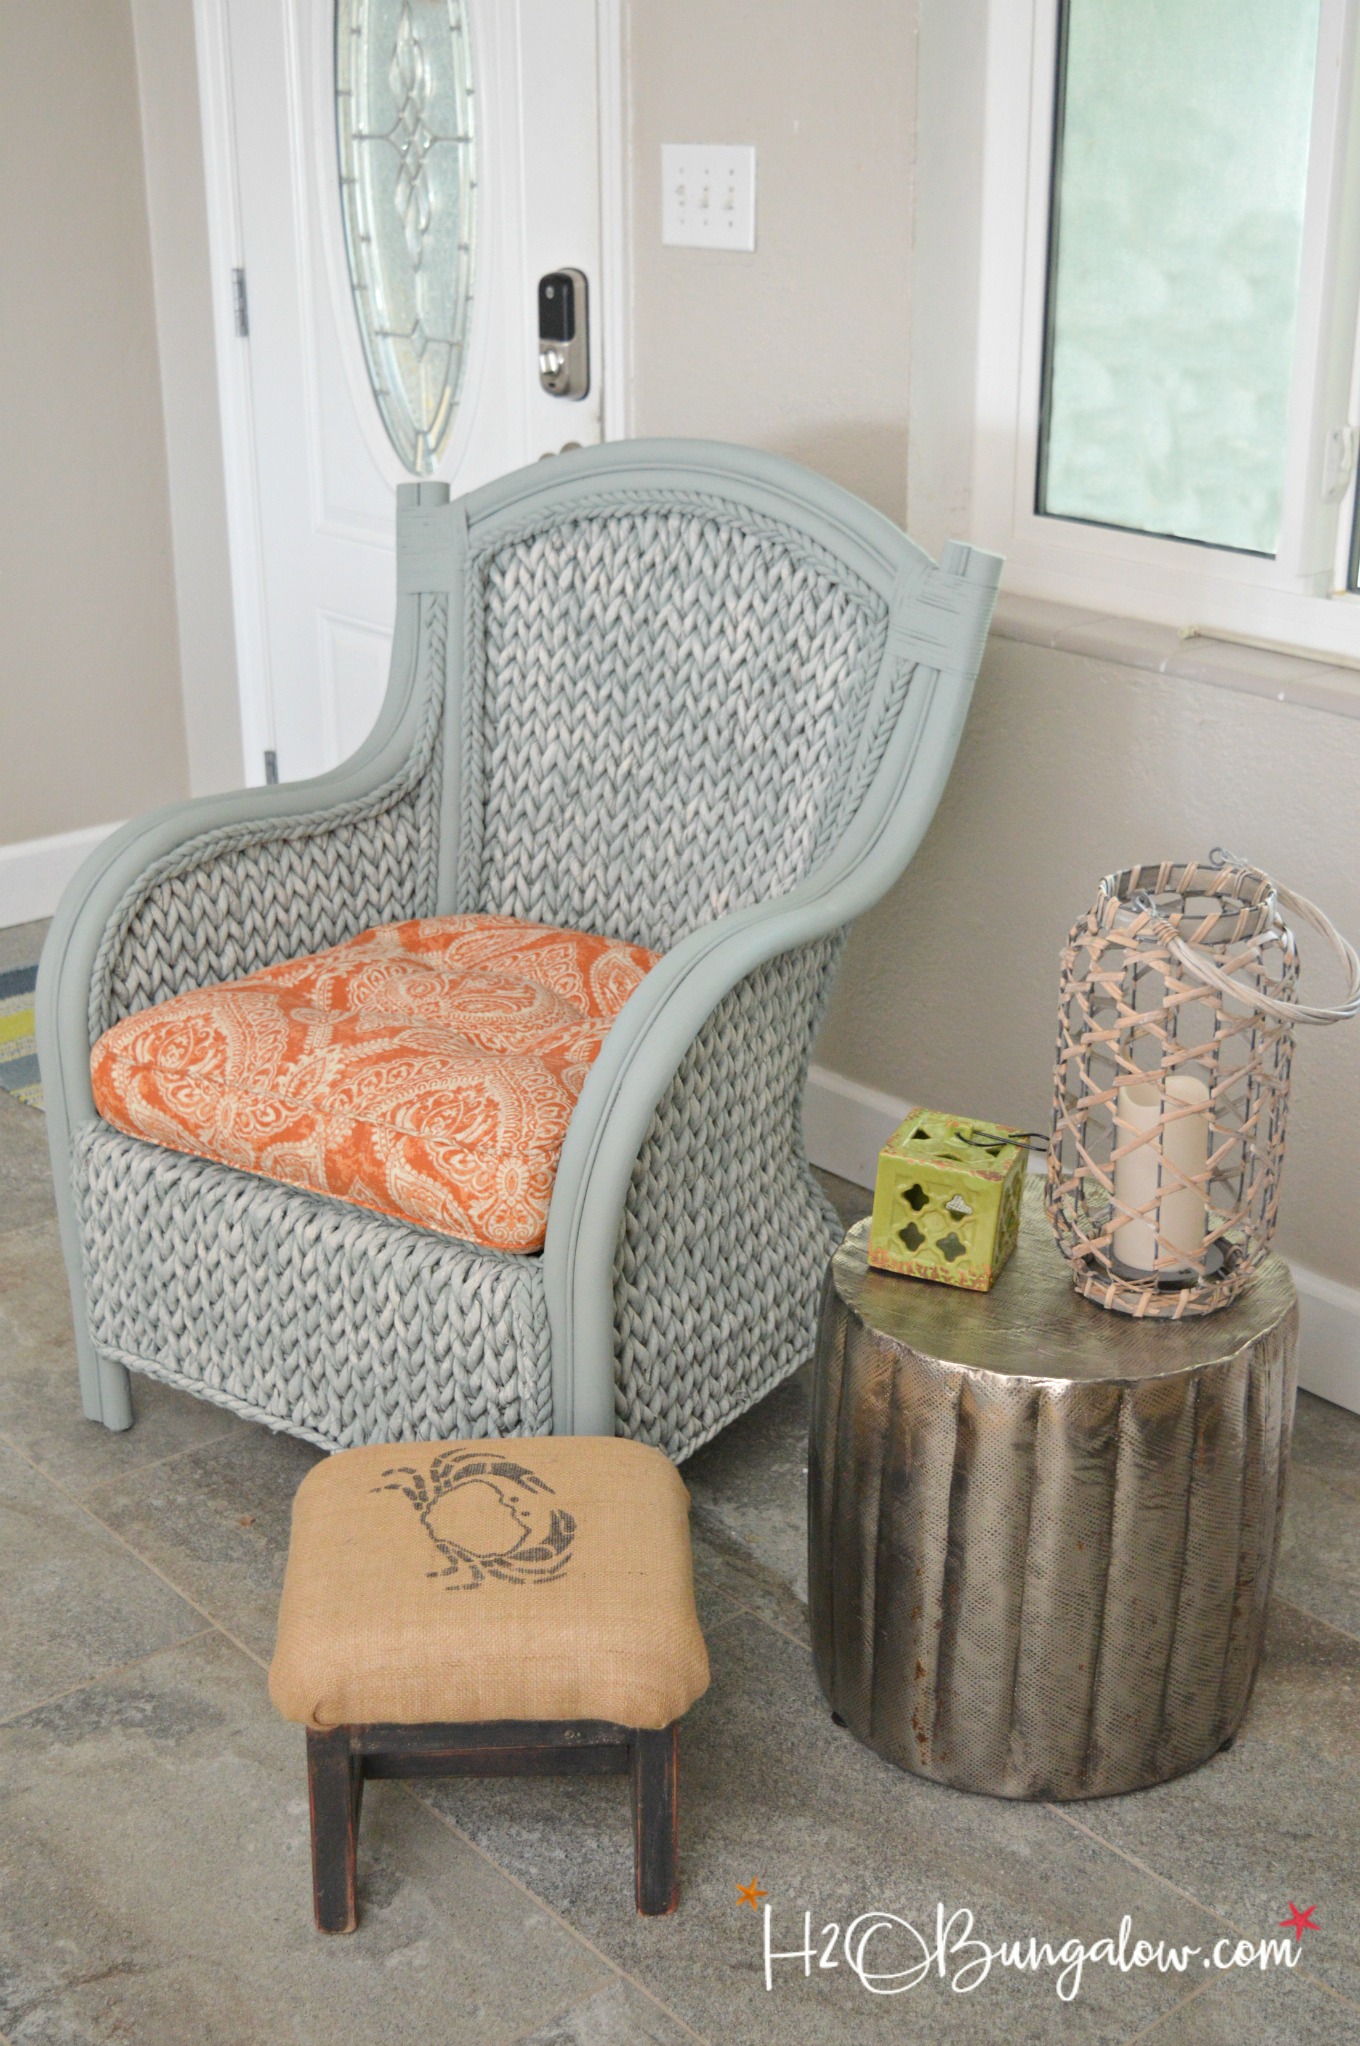 How To Paint Wicker Furniture Quickly And Easily H2obungalow